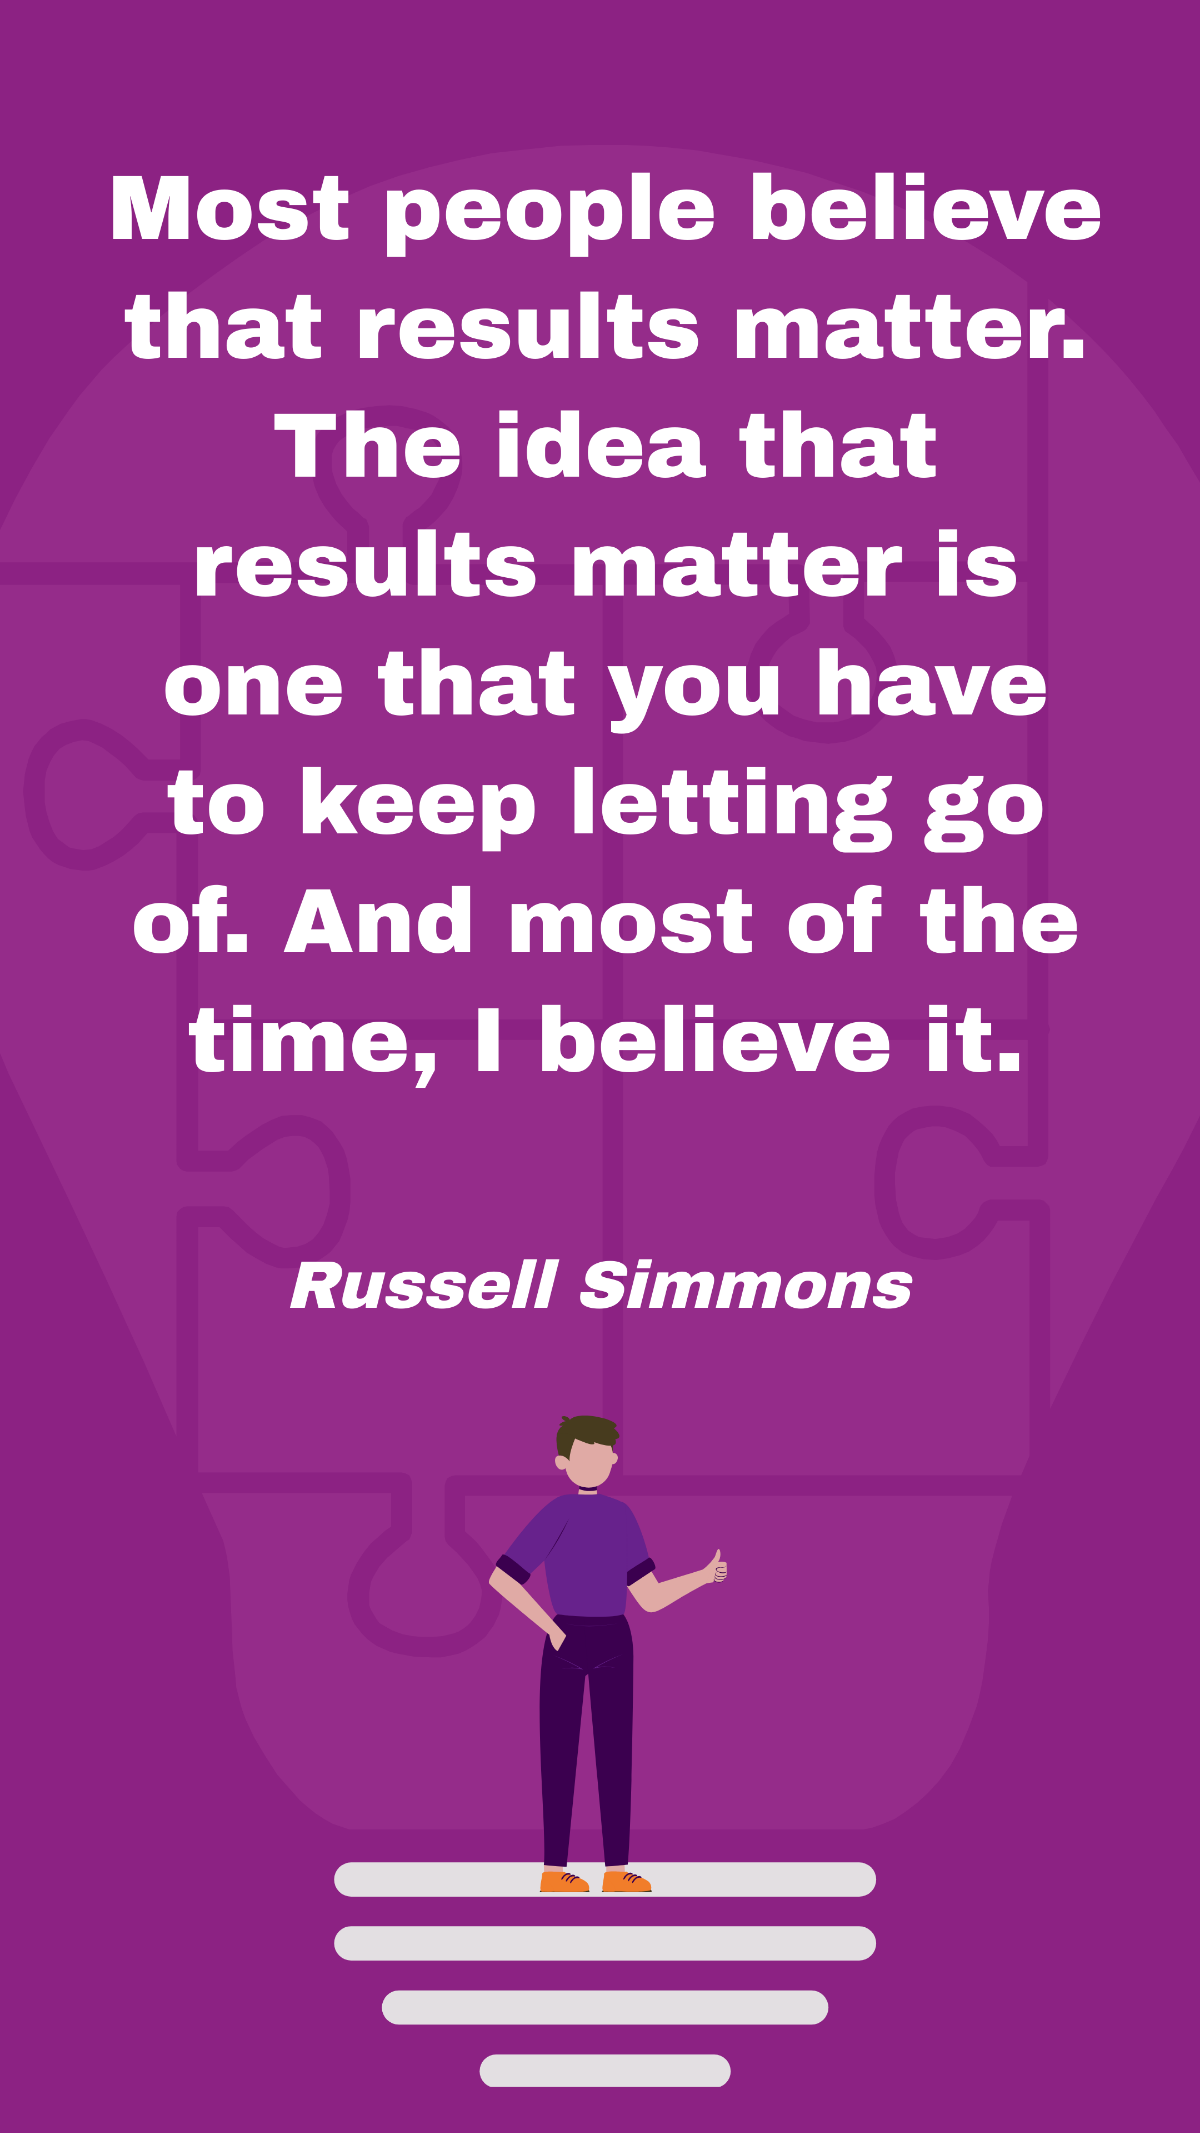 Russell Simmons - Most people believe that results matter. The idea that results matter is one that you have to keep letting go of. And most of the time, I believe it. Template